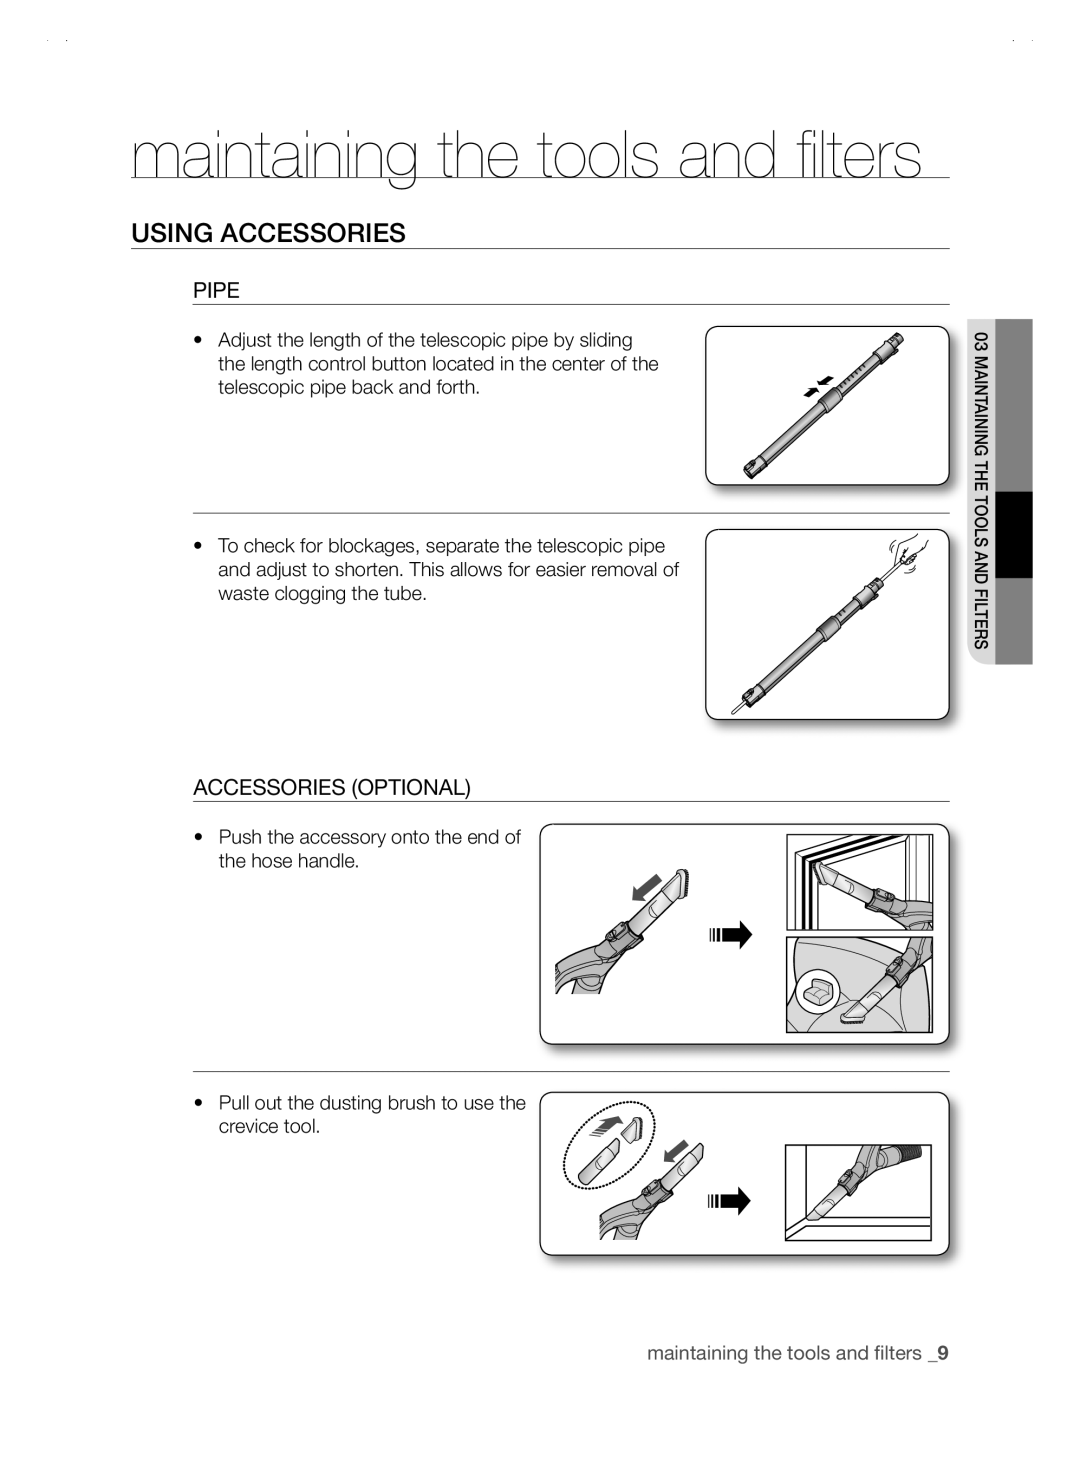 Samsung SC88P user manual using ACCESSORIES, Pipe, Accessories Optional, maintaining the tools and filters _9 